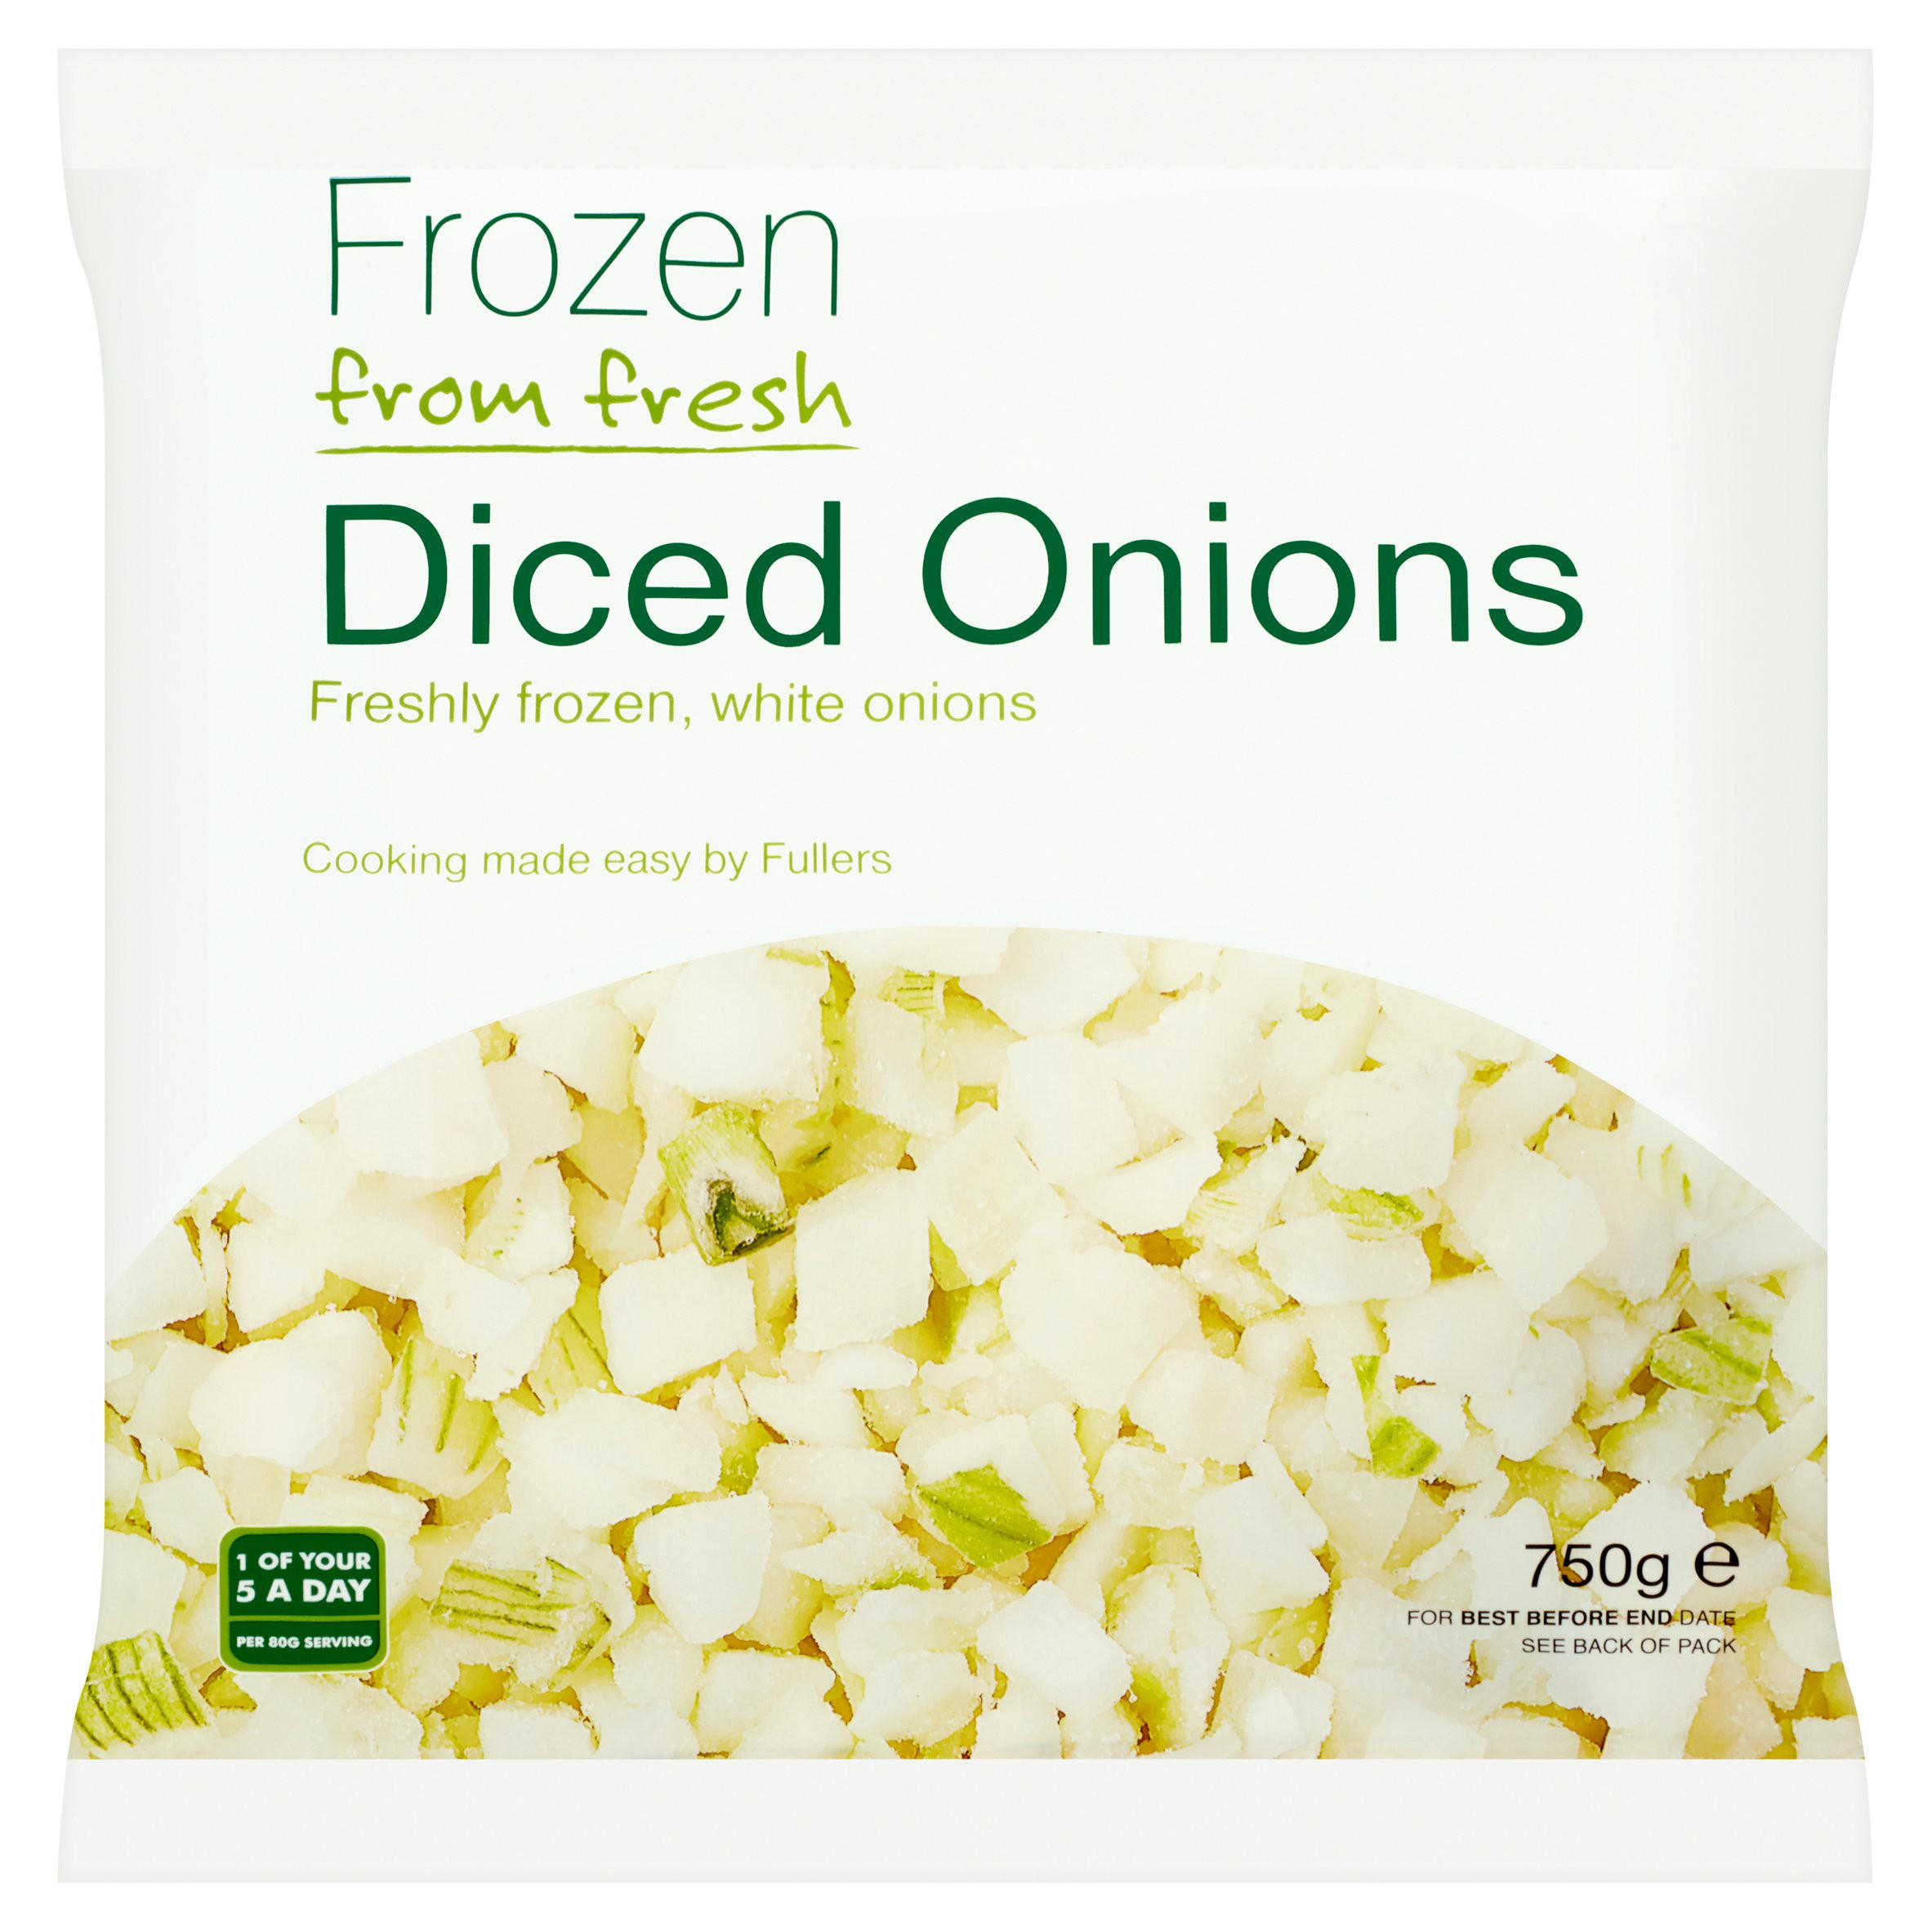 https://assets.iceland.co.uk/i/iceland/frozen_from_fresh_diced_onions_750g_78145_T1.jpg